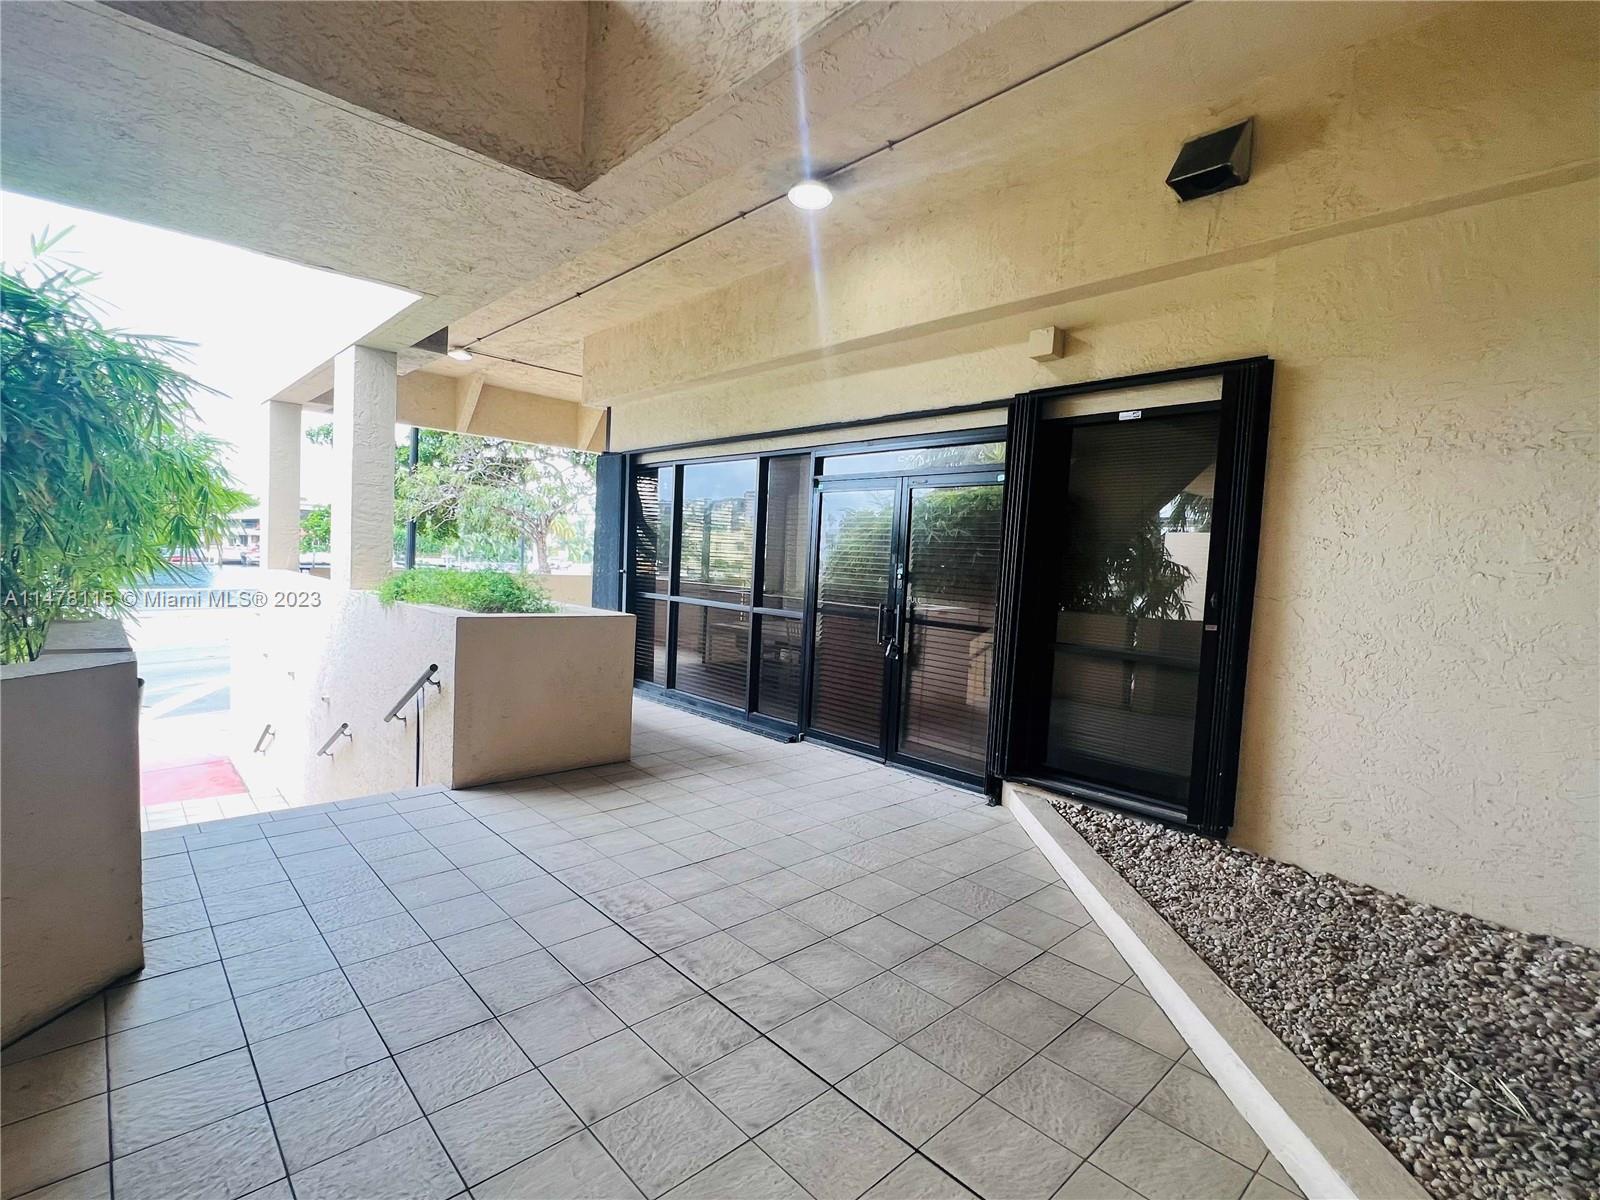 Exceptional opportunity to lease a versatile 2,869 SF OFFICE condo featuring private street entrance and four ADDITIONAL entrances from the lobby. Includes reception, 7 private offices, spacious open area, kitchenette + 2 restrooms. With the beach just steps away and access to relaxing outdoor areas, employees will appreciate the added effort put into ensuring their well-being alongside their productivity. Other business in the building include, gallery, medical offices, real estate, professional services. 

A prime spot for hosting both local and out-of-town clients, situated on the picturesque Collins Ave, on the ground floor of the prestigious Club Atlantis Condominium and a block away from Hotel 1.

Also available for sale at $1,500,000.